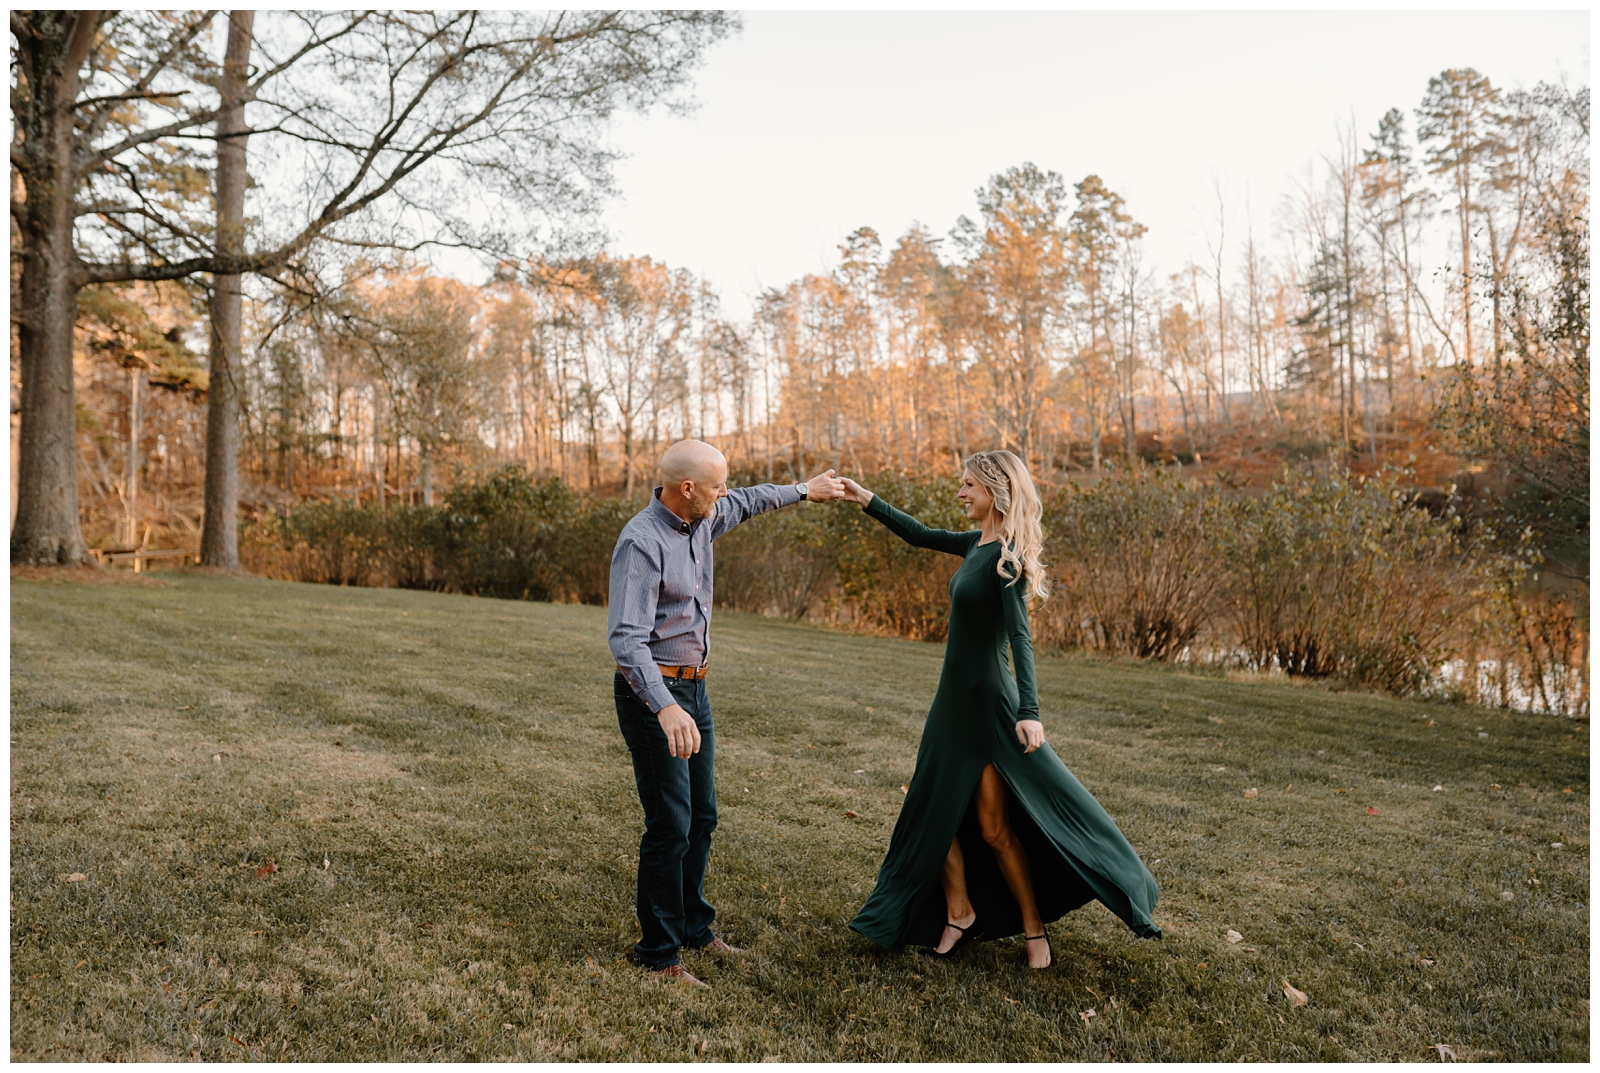 Fun and carefree engagement session in Greensboro NC by North Carolina wedding photographer